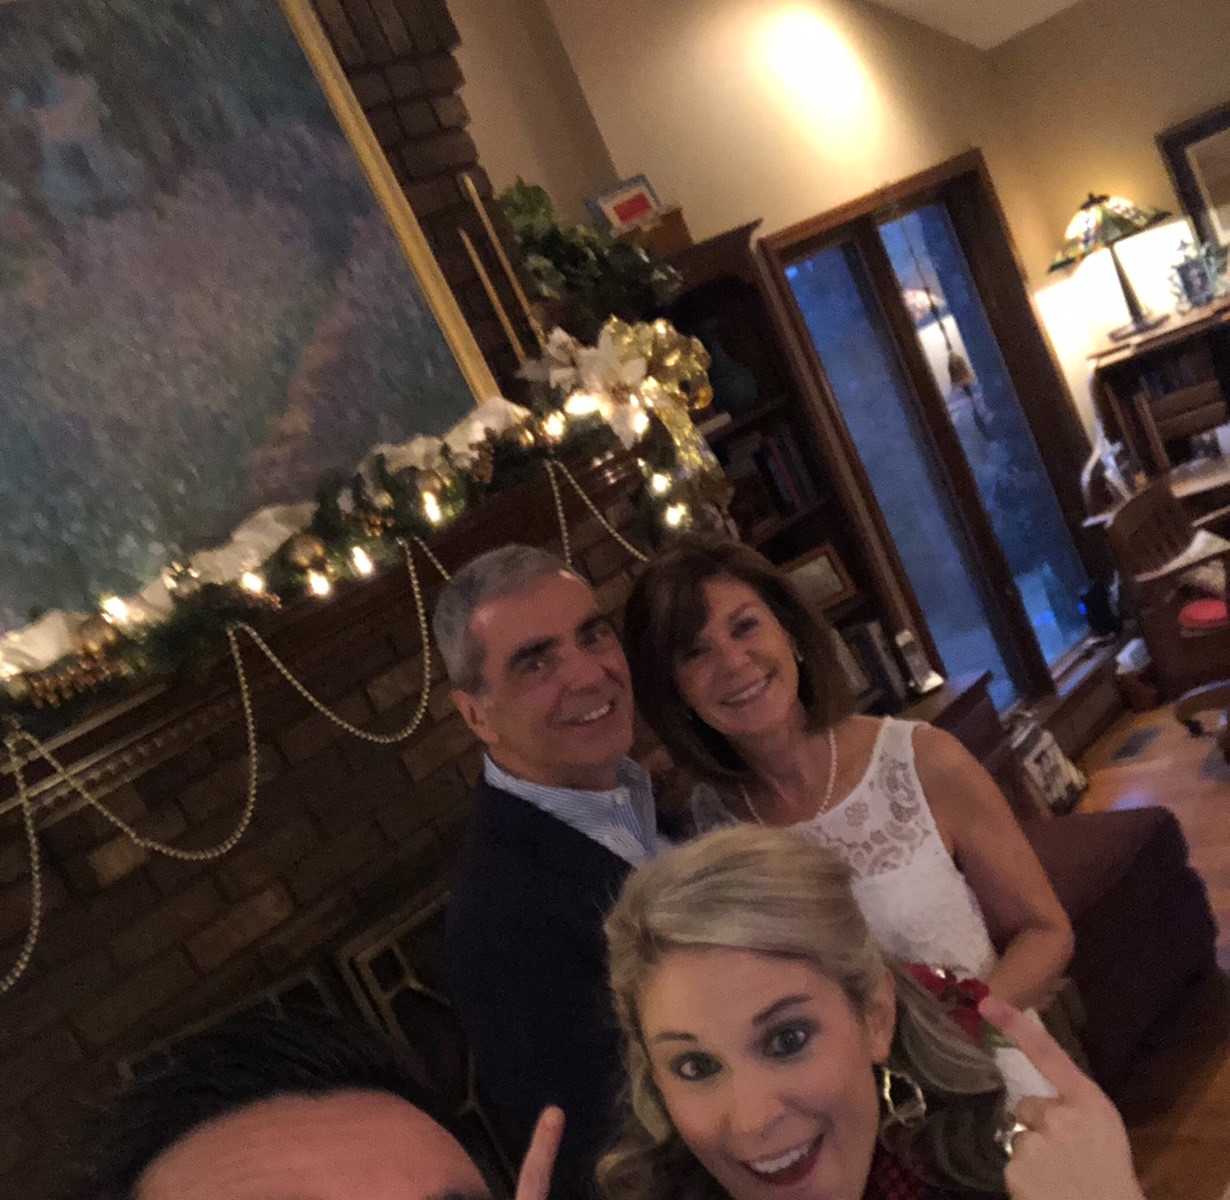 man takes selfie with a woman and couple smiling int the background in front of a fire place